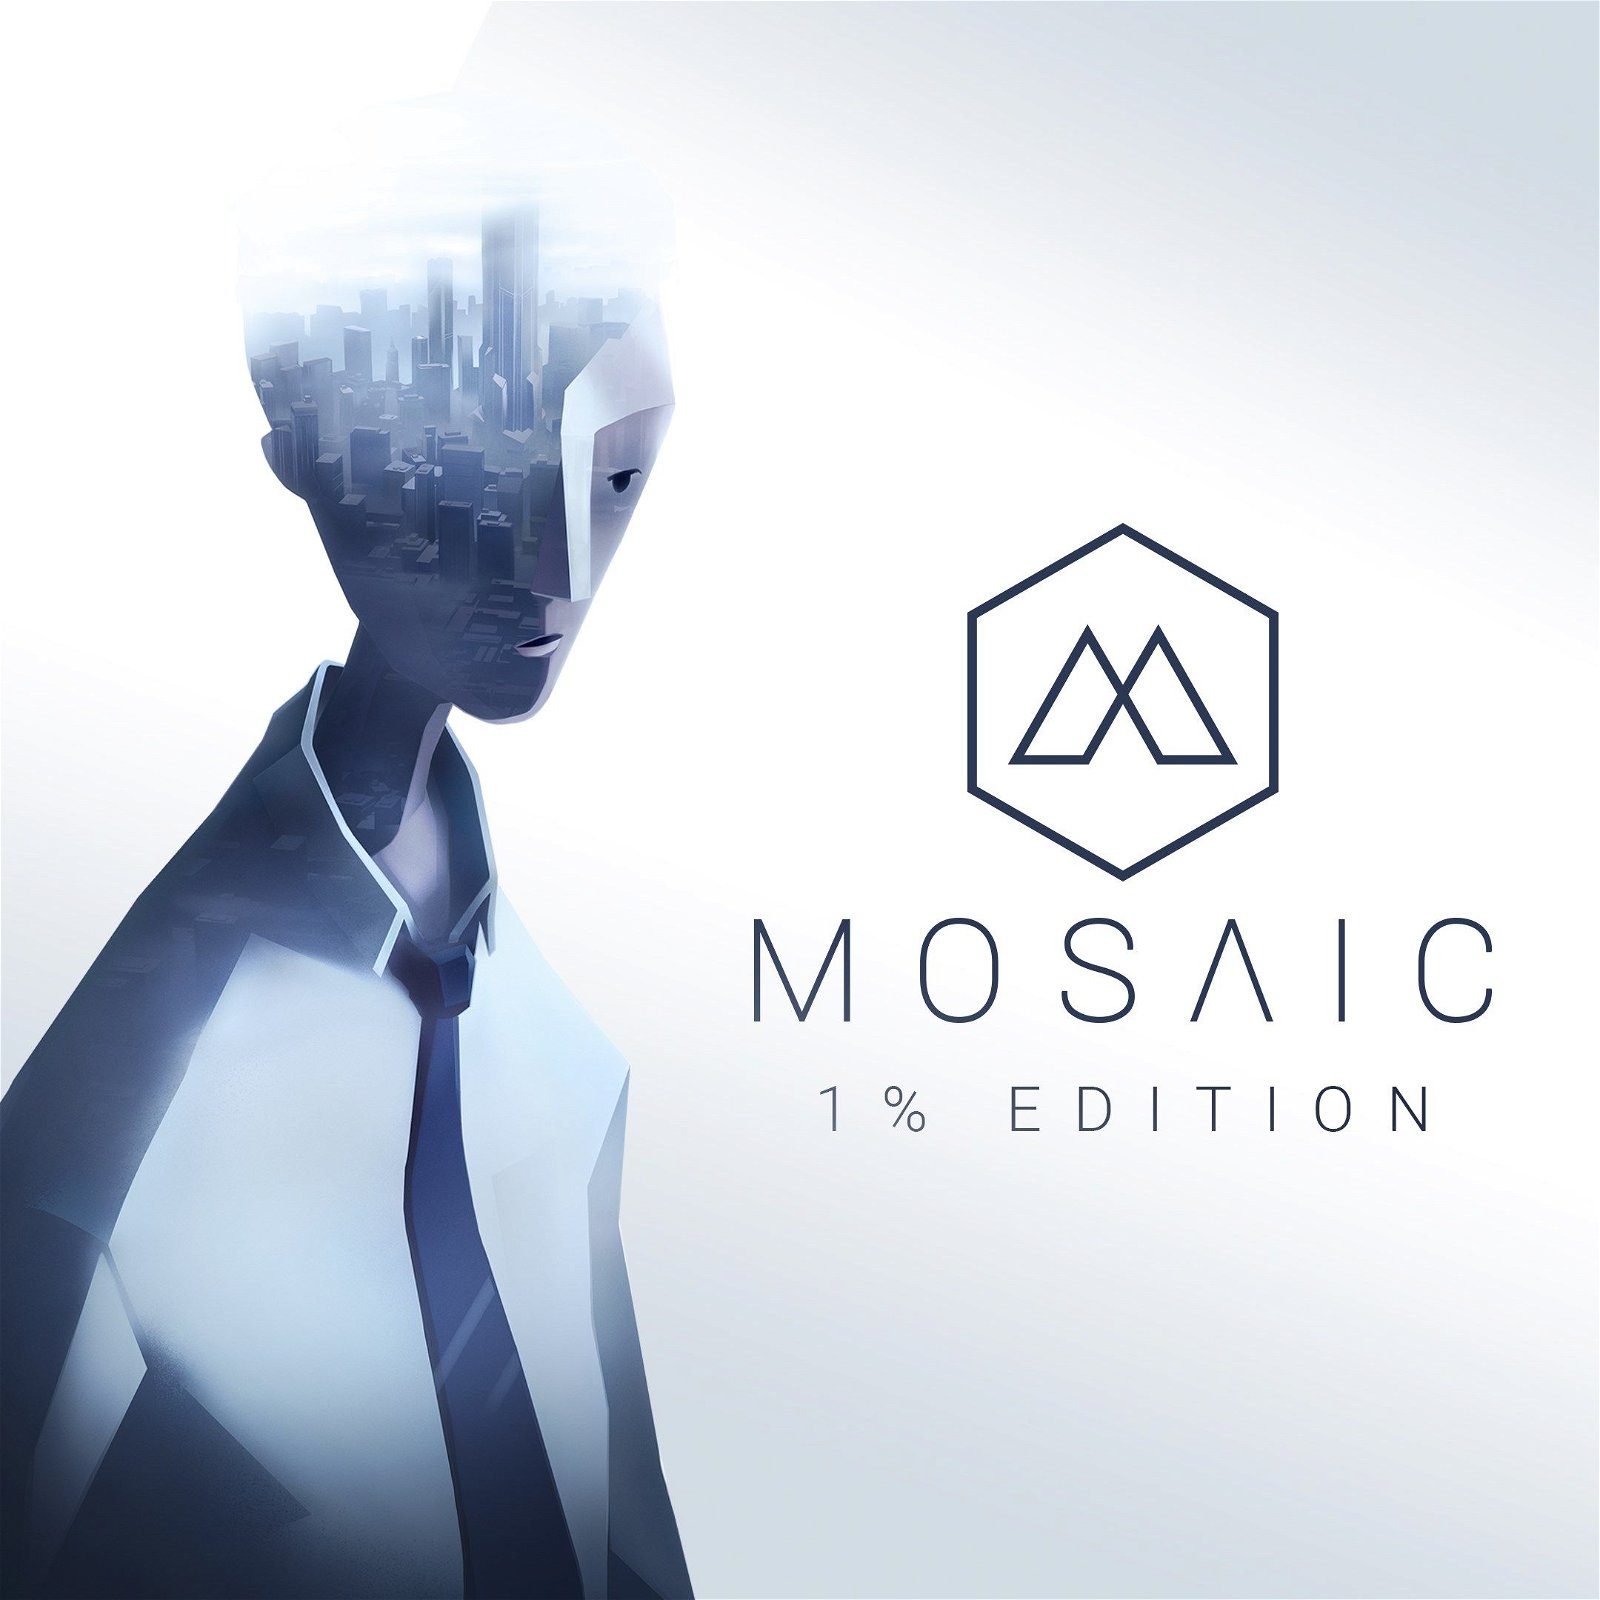 Image of The Mosaic 1% Edition